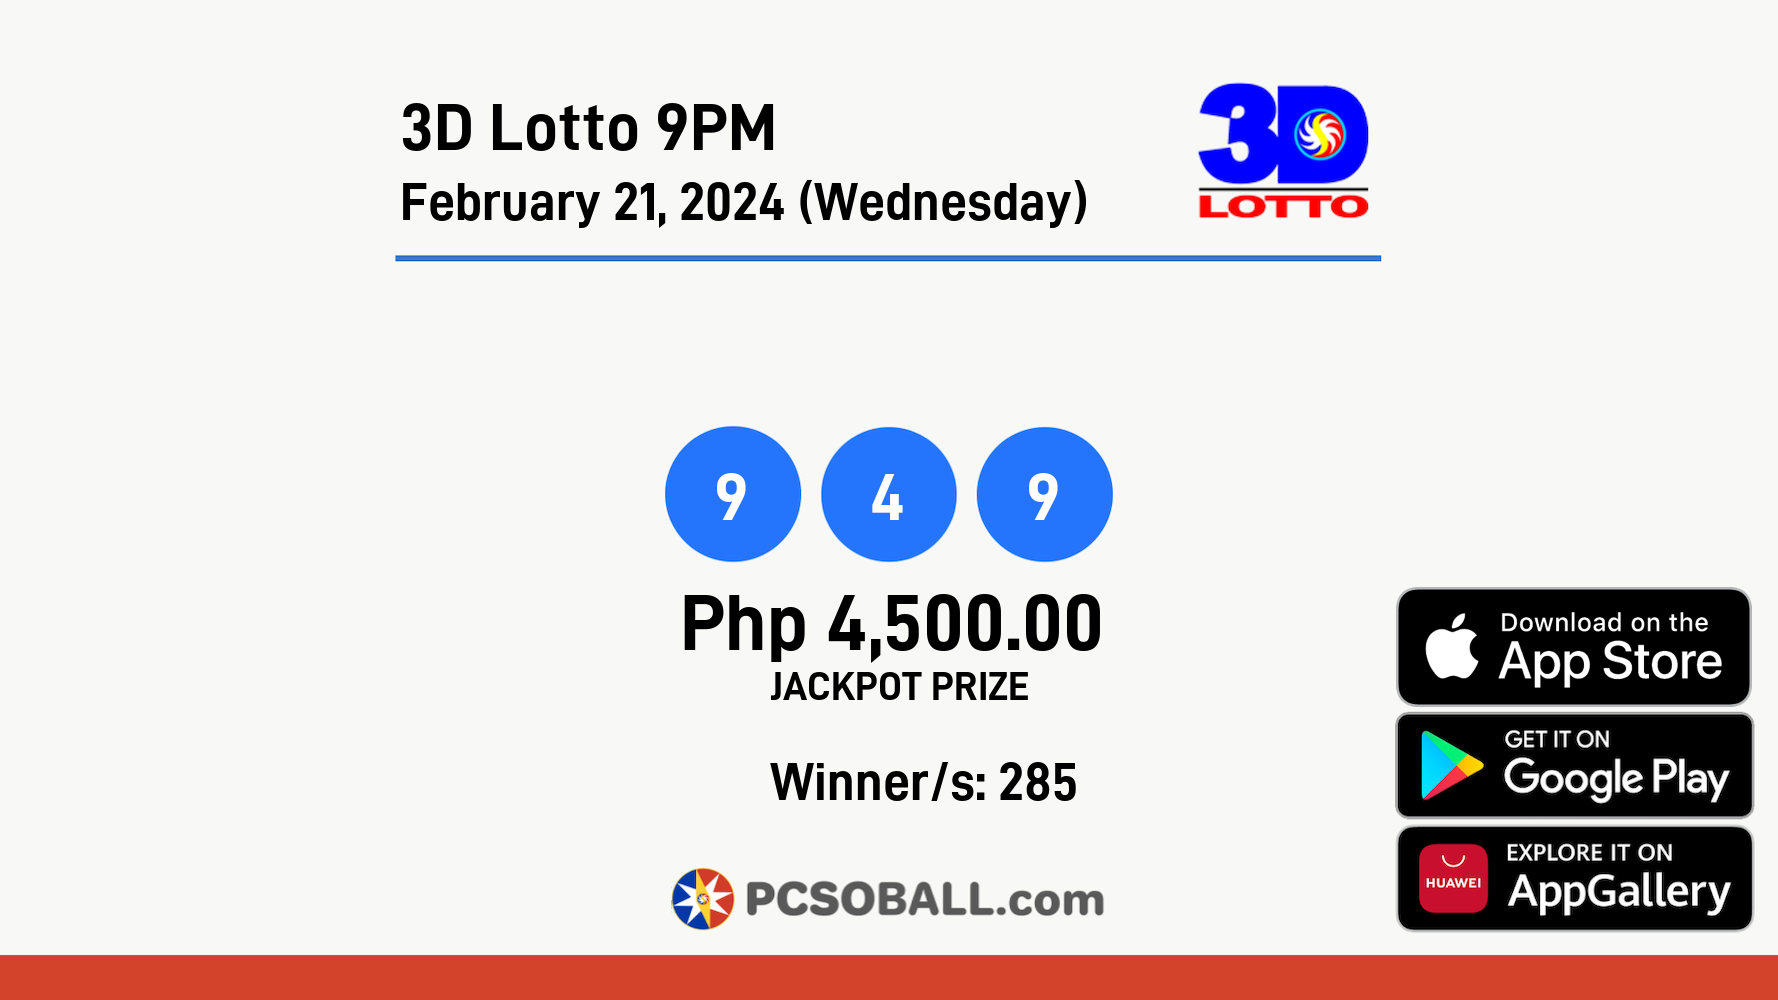 3D Lotto 9PM February 21, 2024 (Wednesday) Result